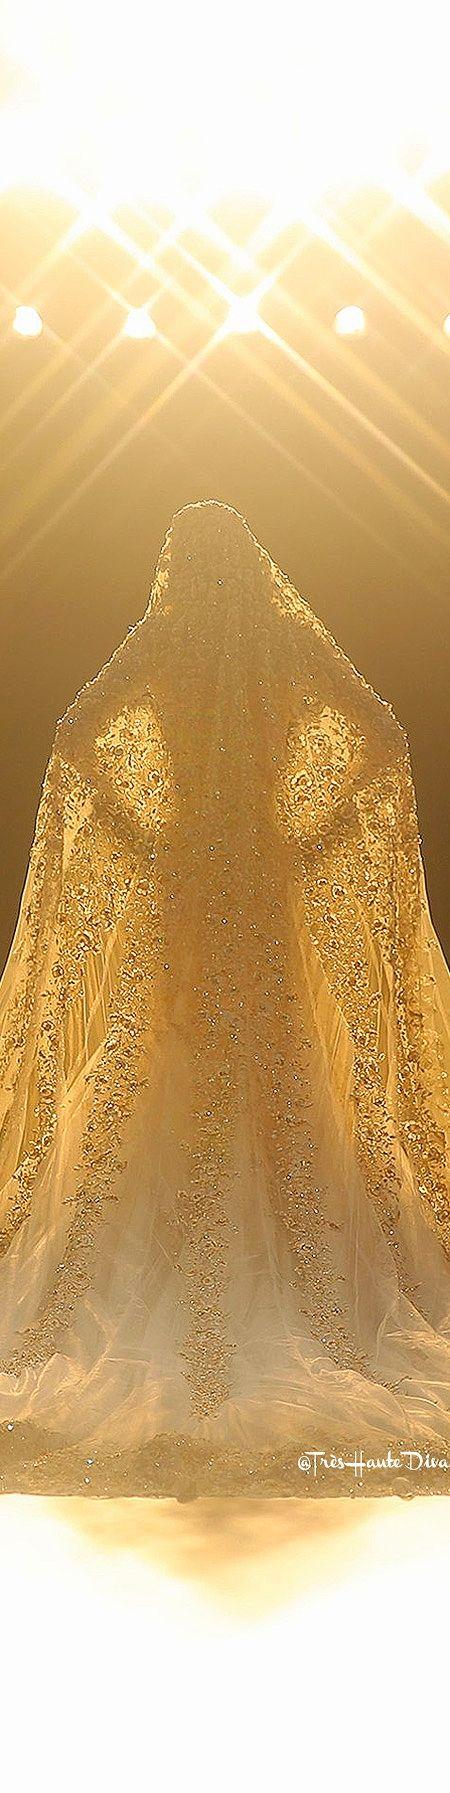 Wedding - Ralph & Russo AW 2015/16 Couture Pinterest